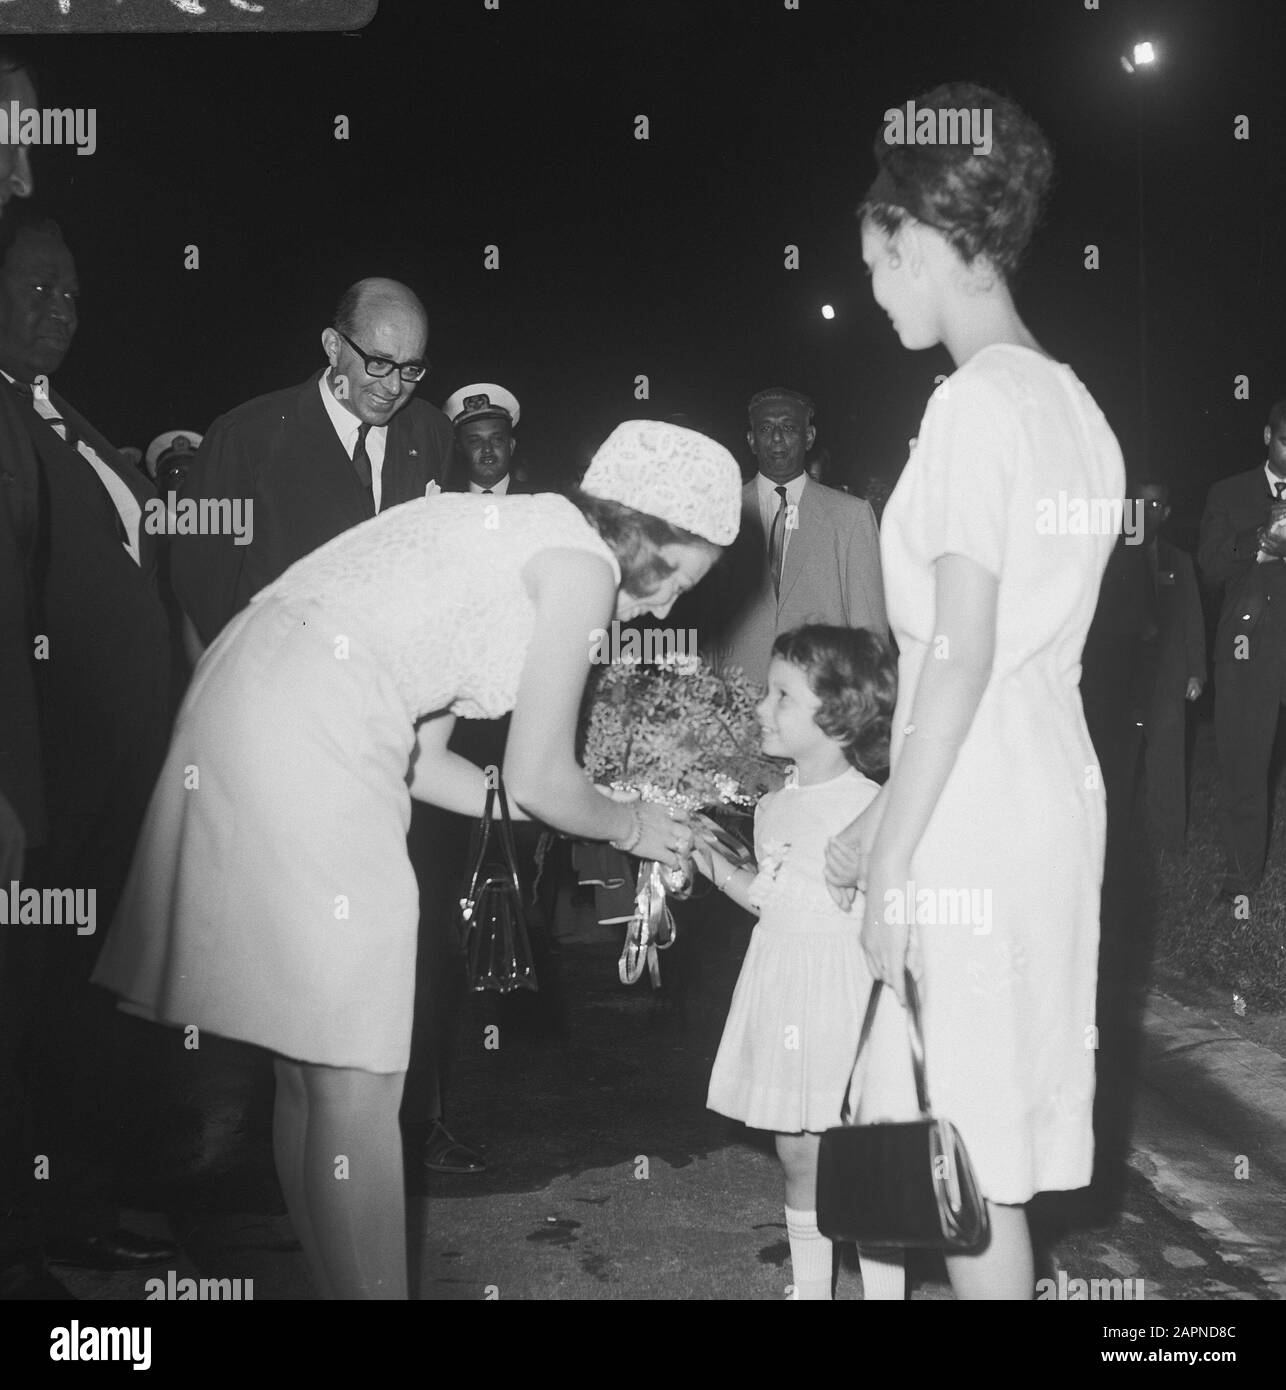 Princess Beatrix and Claus in Suriname, at Zanderij airport Princess Beatrix was offered flowers Date: July 4, 1966 Keywords: FLOWERS, offers, princesses, airports Personal name: Beatrix, princess, Claus, prince, Zanderij Stock Photo